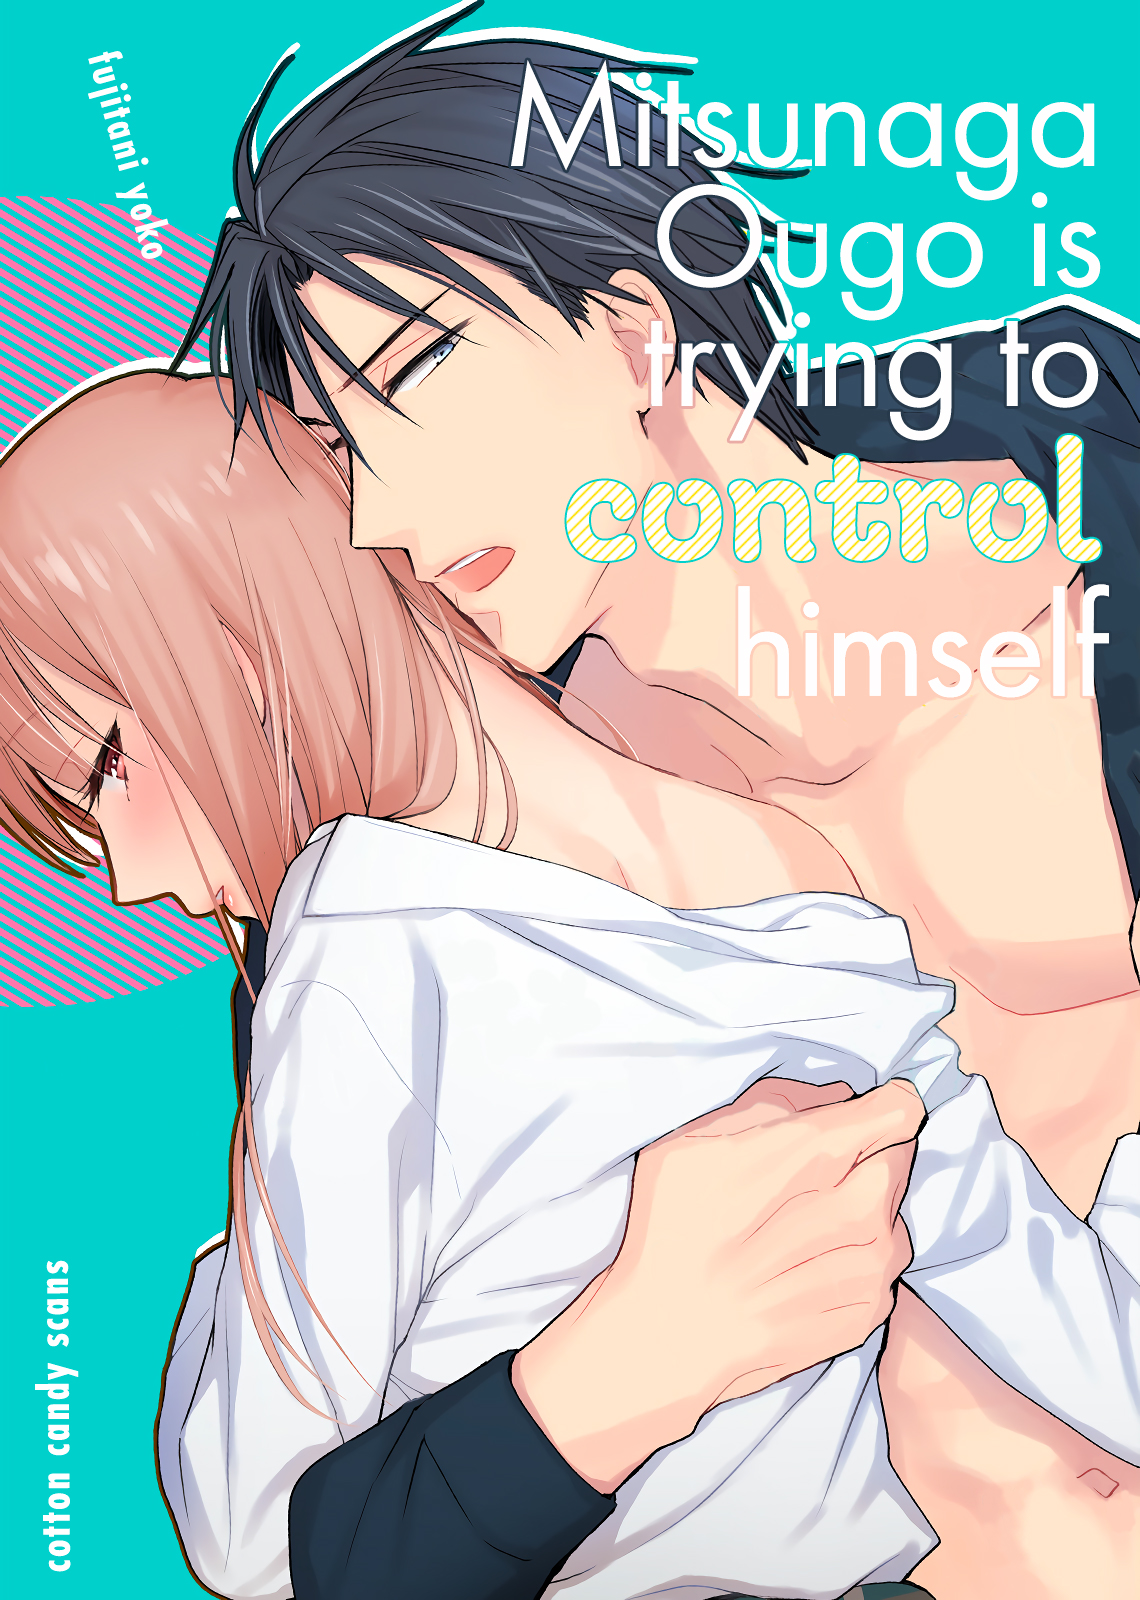 Mitsunaga Ougo Is Trying To Control Himself - Page 2